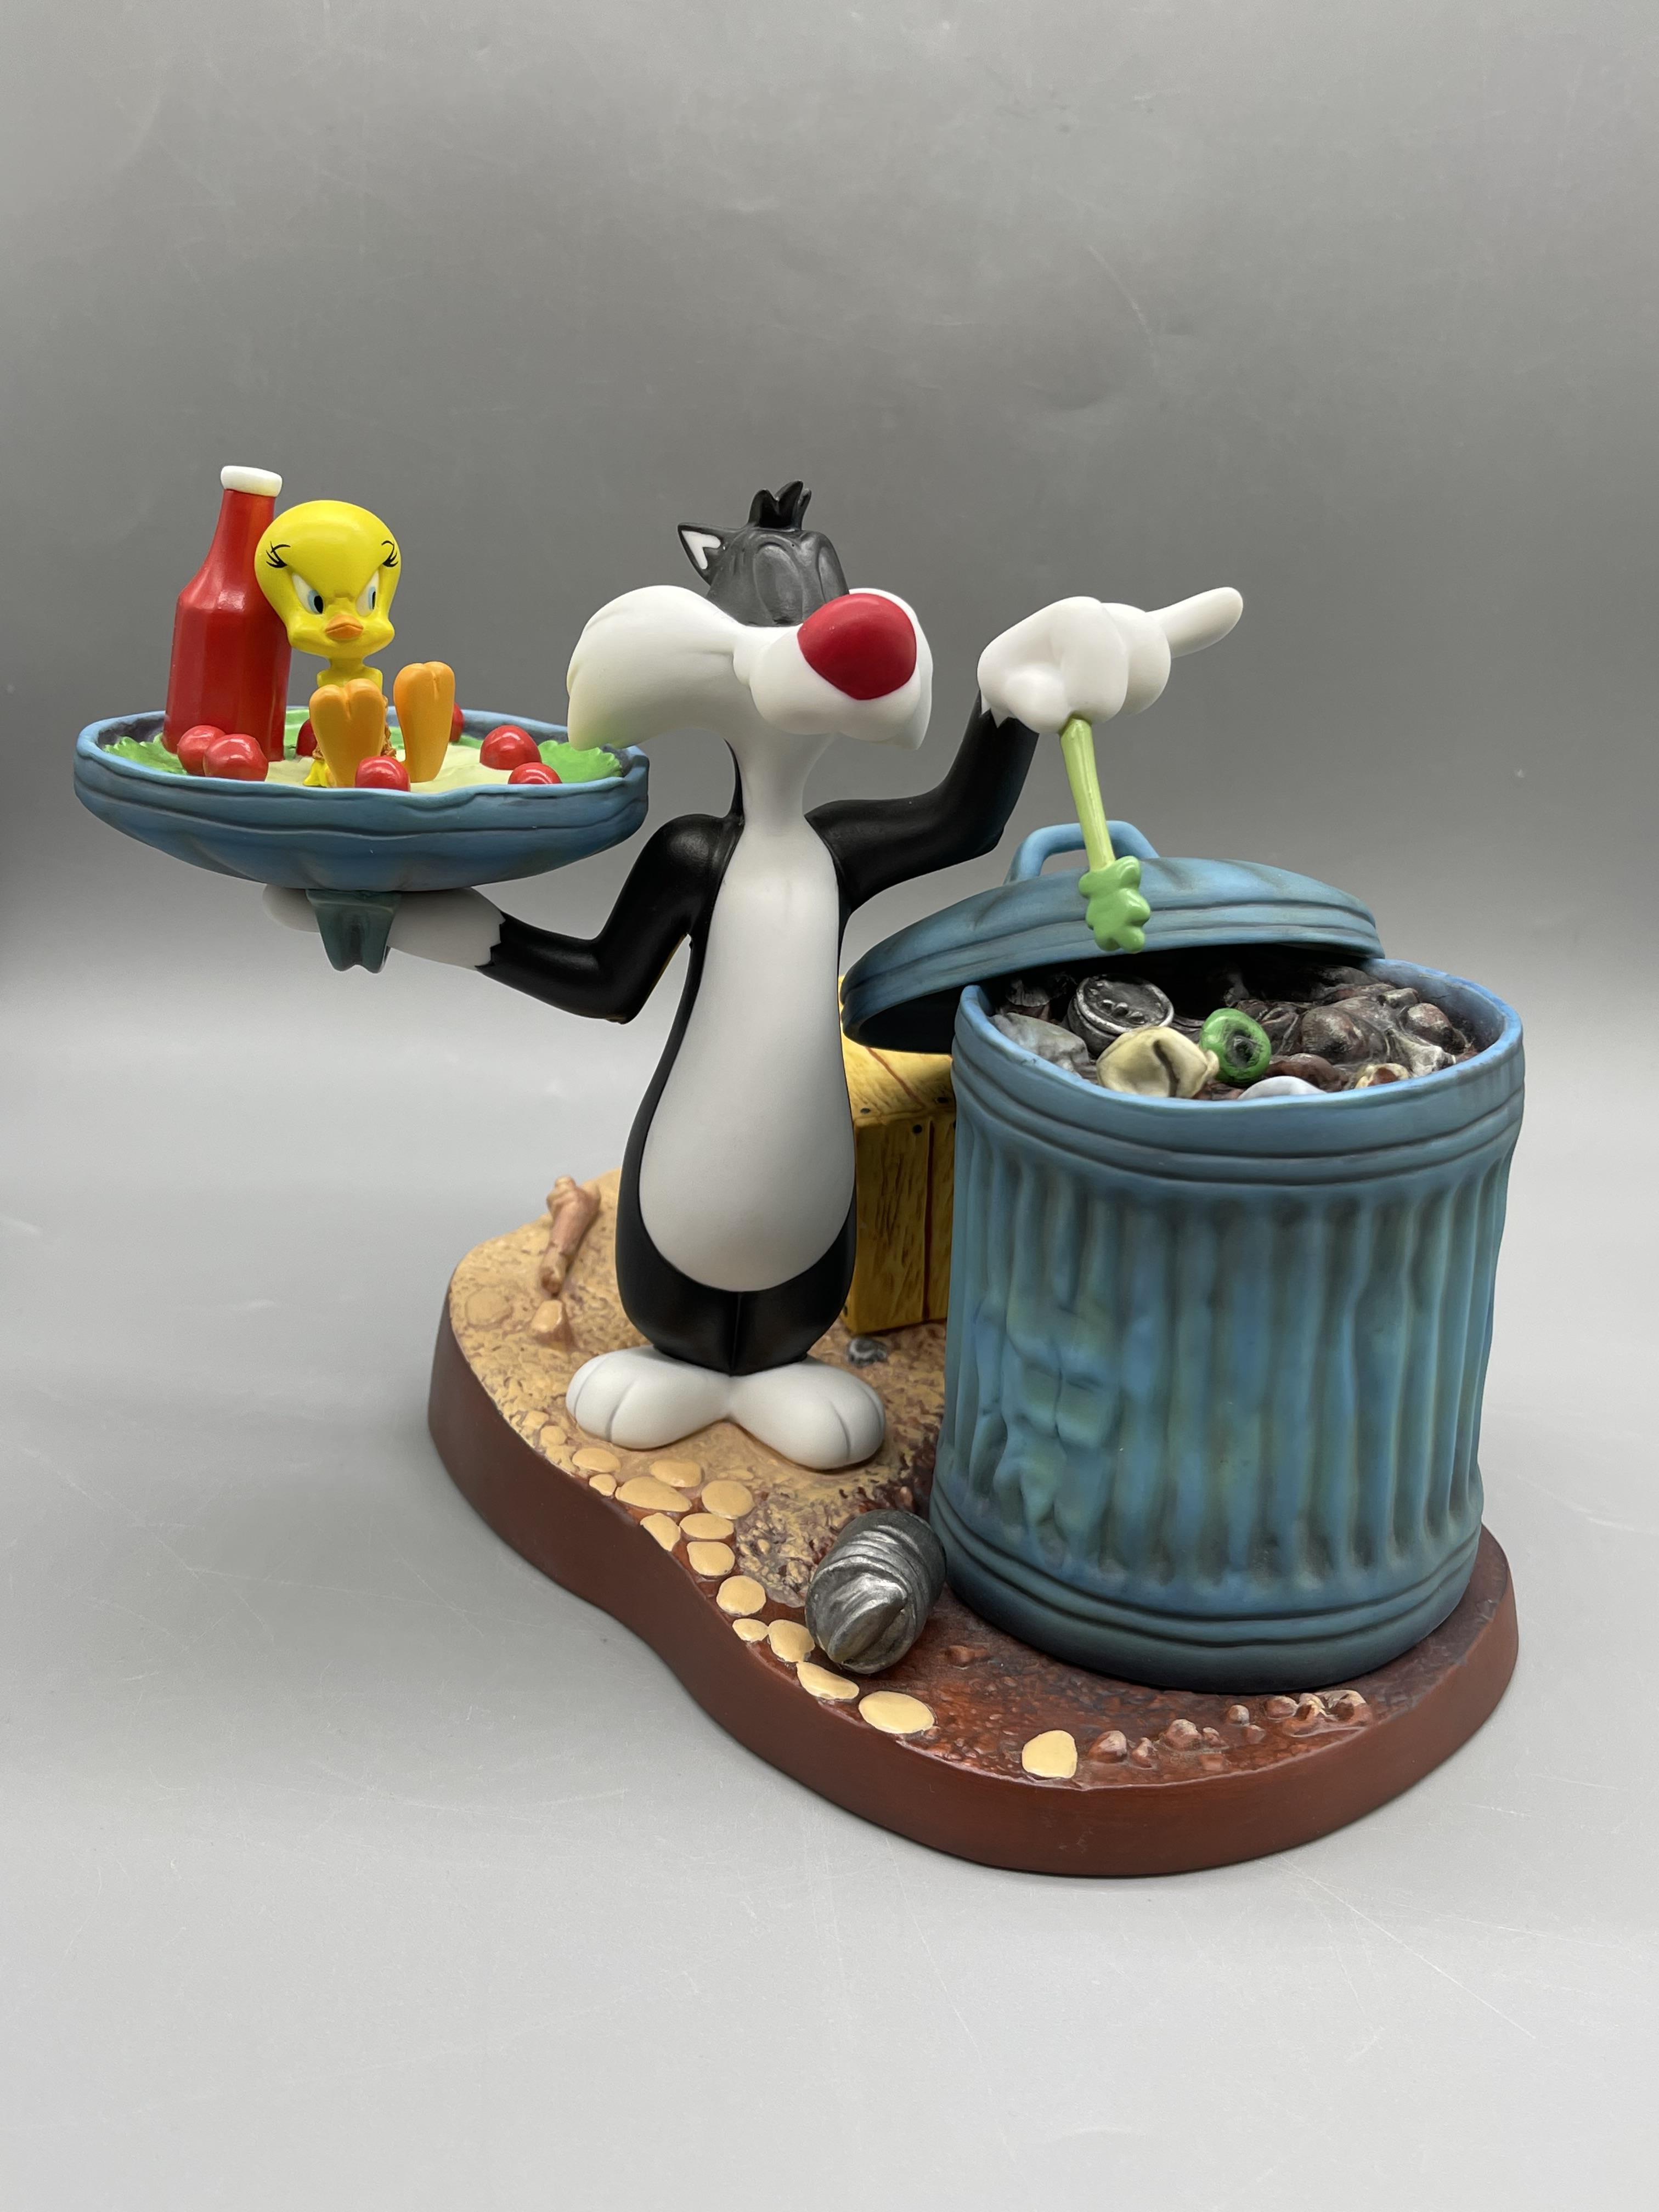 Boxed Wedgewood - Looney Tunes - Sylvester's Buffe - Image 12 of 18